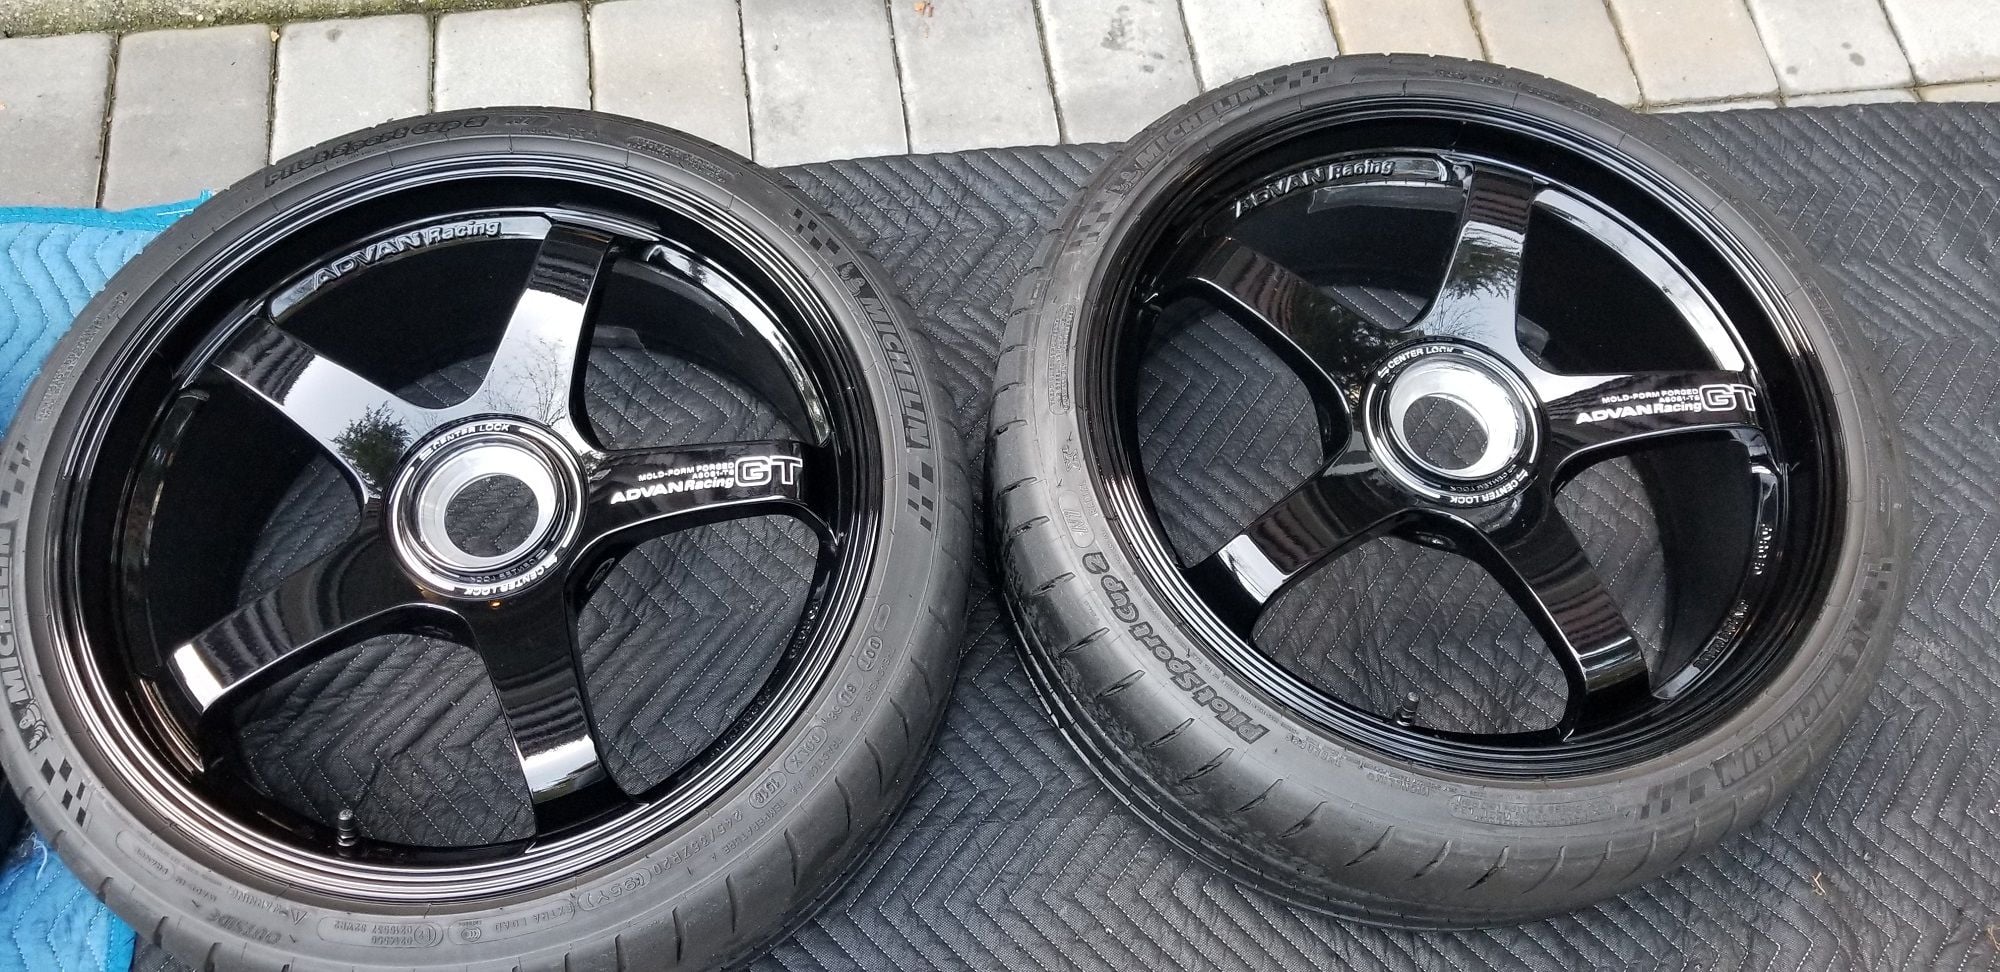 Wheels and Tires/Axles - Advan GT Center Locks Wheels with Cup2 N1 for 991 GTS/GT3. Used Less than 3 months. - Used - 2014 to 2018 Porsche 911 - Oakland, CA 94611, United States